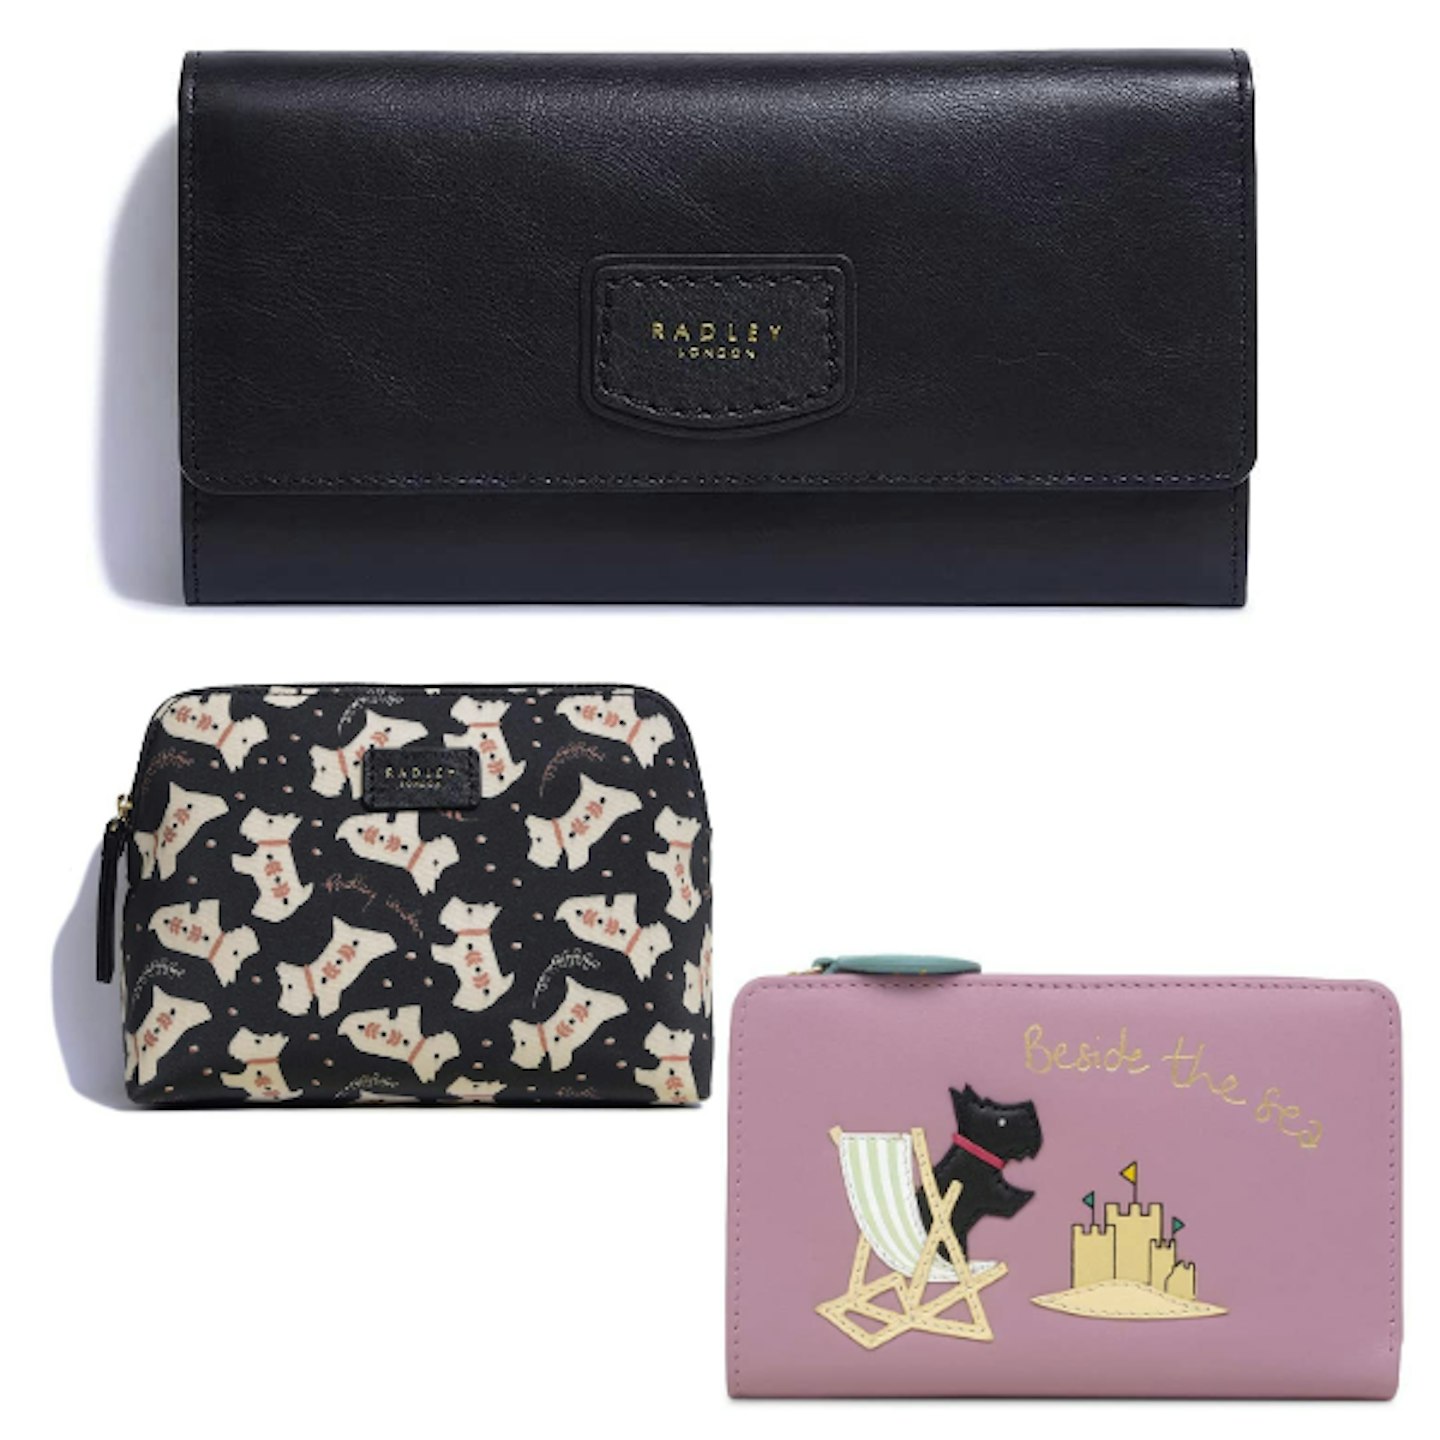 Up to 60% off Radley Handbags and Purses